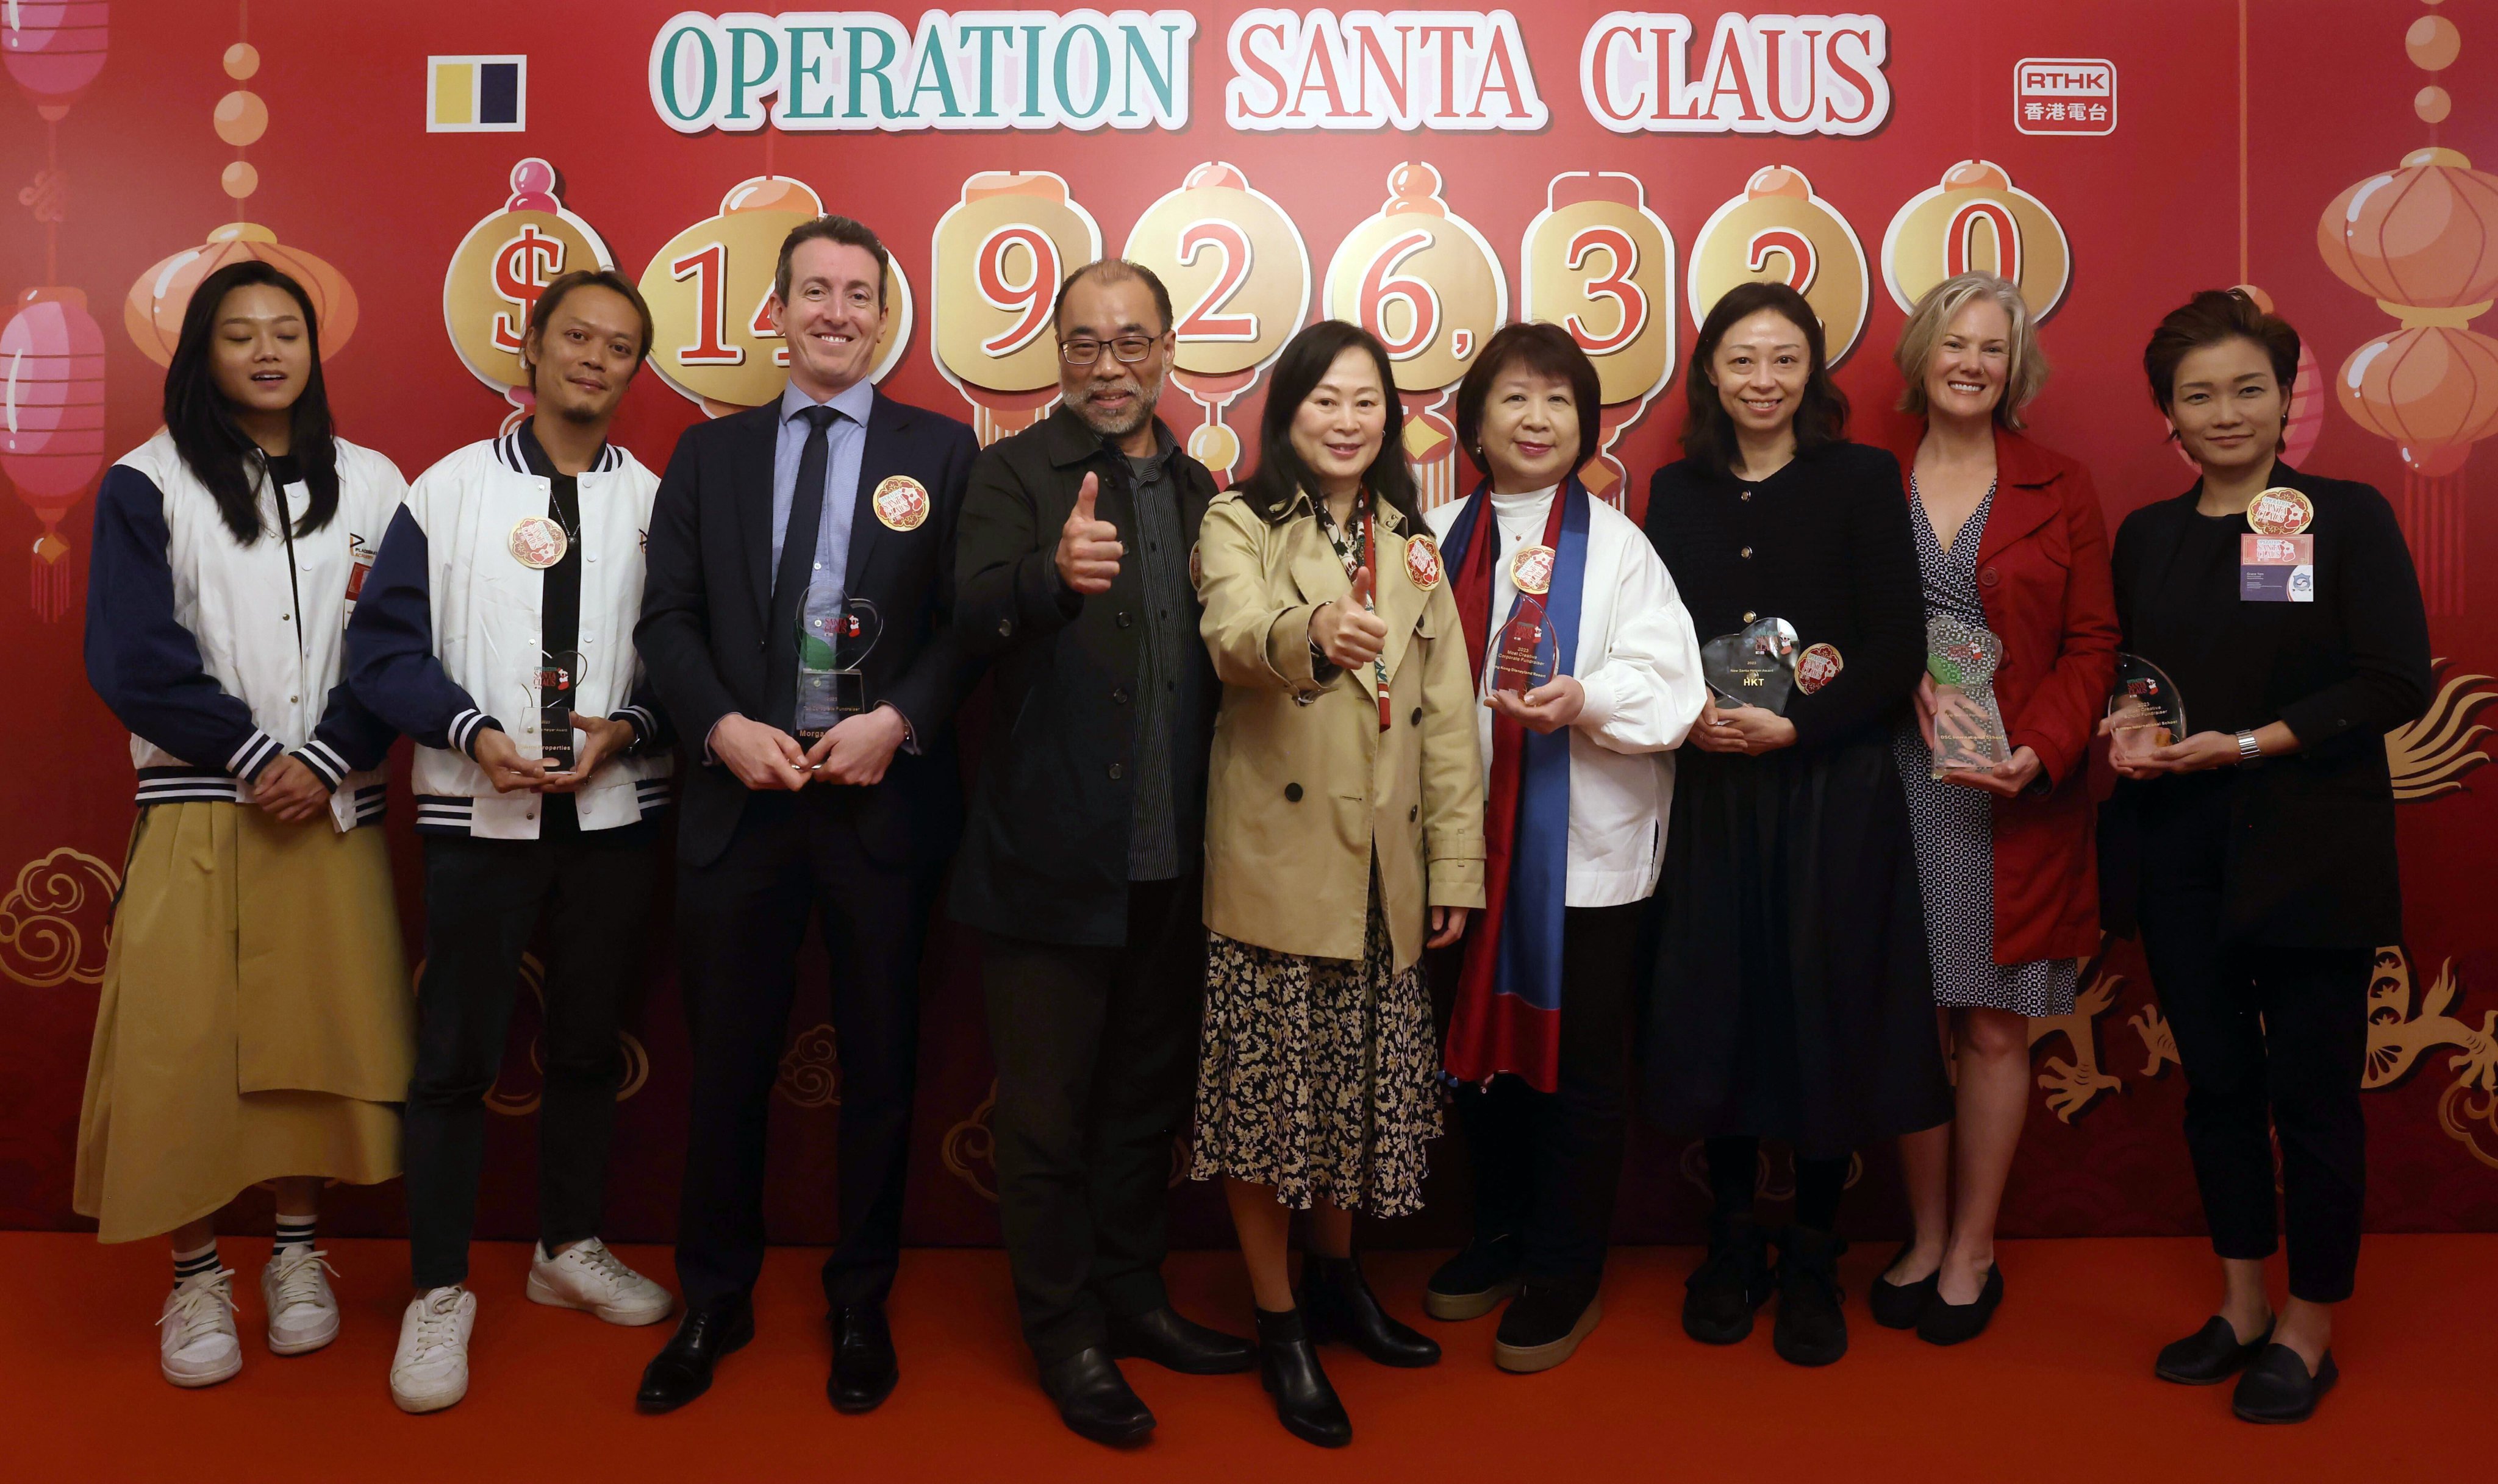 The Operation Santa Claus closing ceremony, with (from left) Peony Ho, Evan Li, David Wallis, Vincent Lee, Post editor-in-chief Tammy Tam, Mary Lam, Yen Lee, Rebecca Marans and Grace Yen. Photo: Jonathan Wong